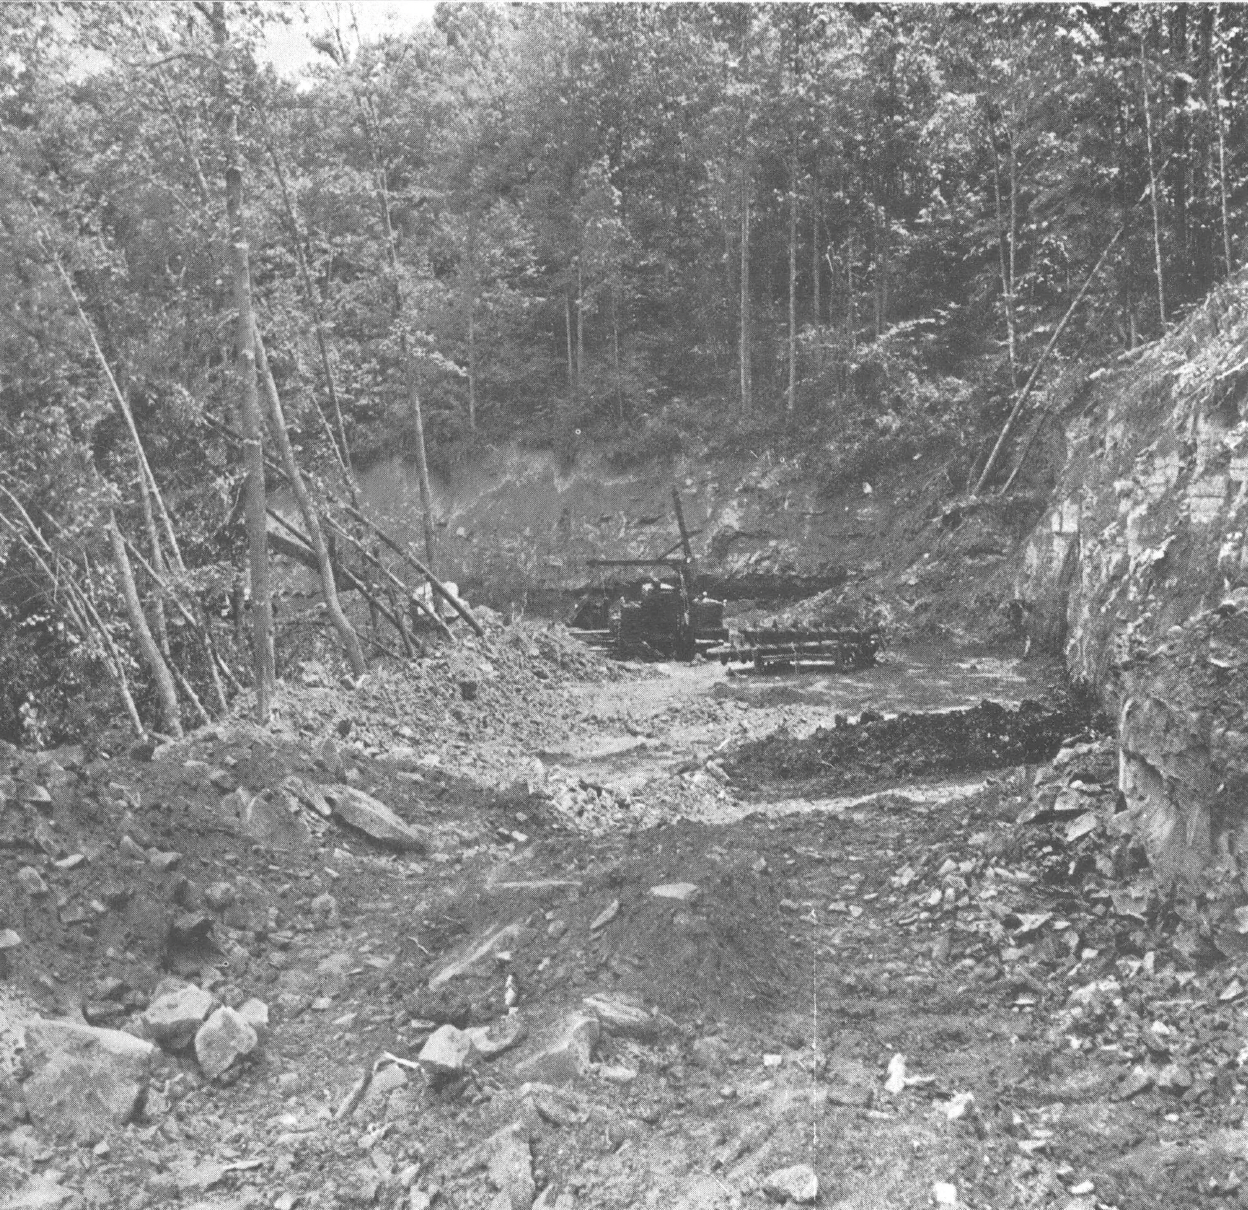 Black and white photo of hillside being excavated, with trees on their sides and forest surrounding